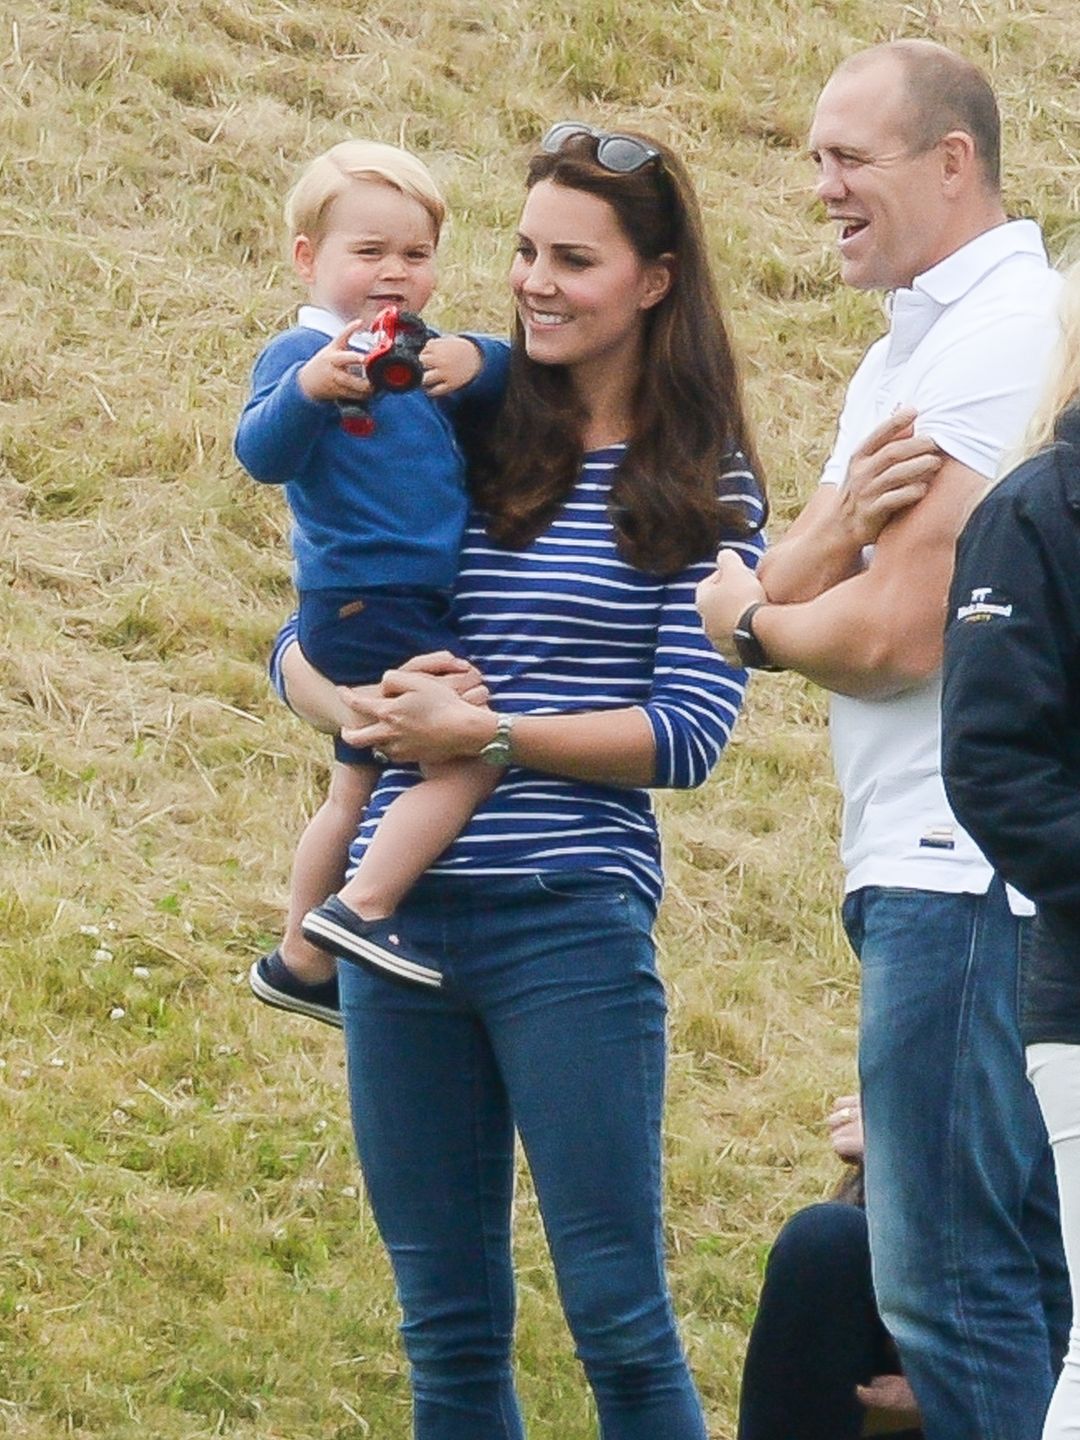 Princess Kate (then Duchess of Cambridge) with her son Prince George and Mike Tindall at the Gigaset Charity Polo Match at Beaufort Polo Club on June 14, 2015 in Tetbury, England 